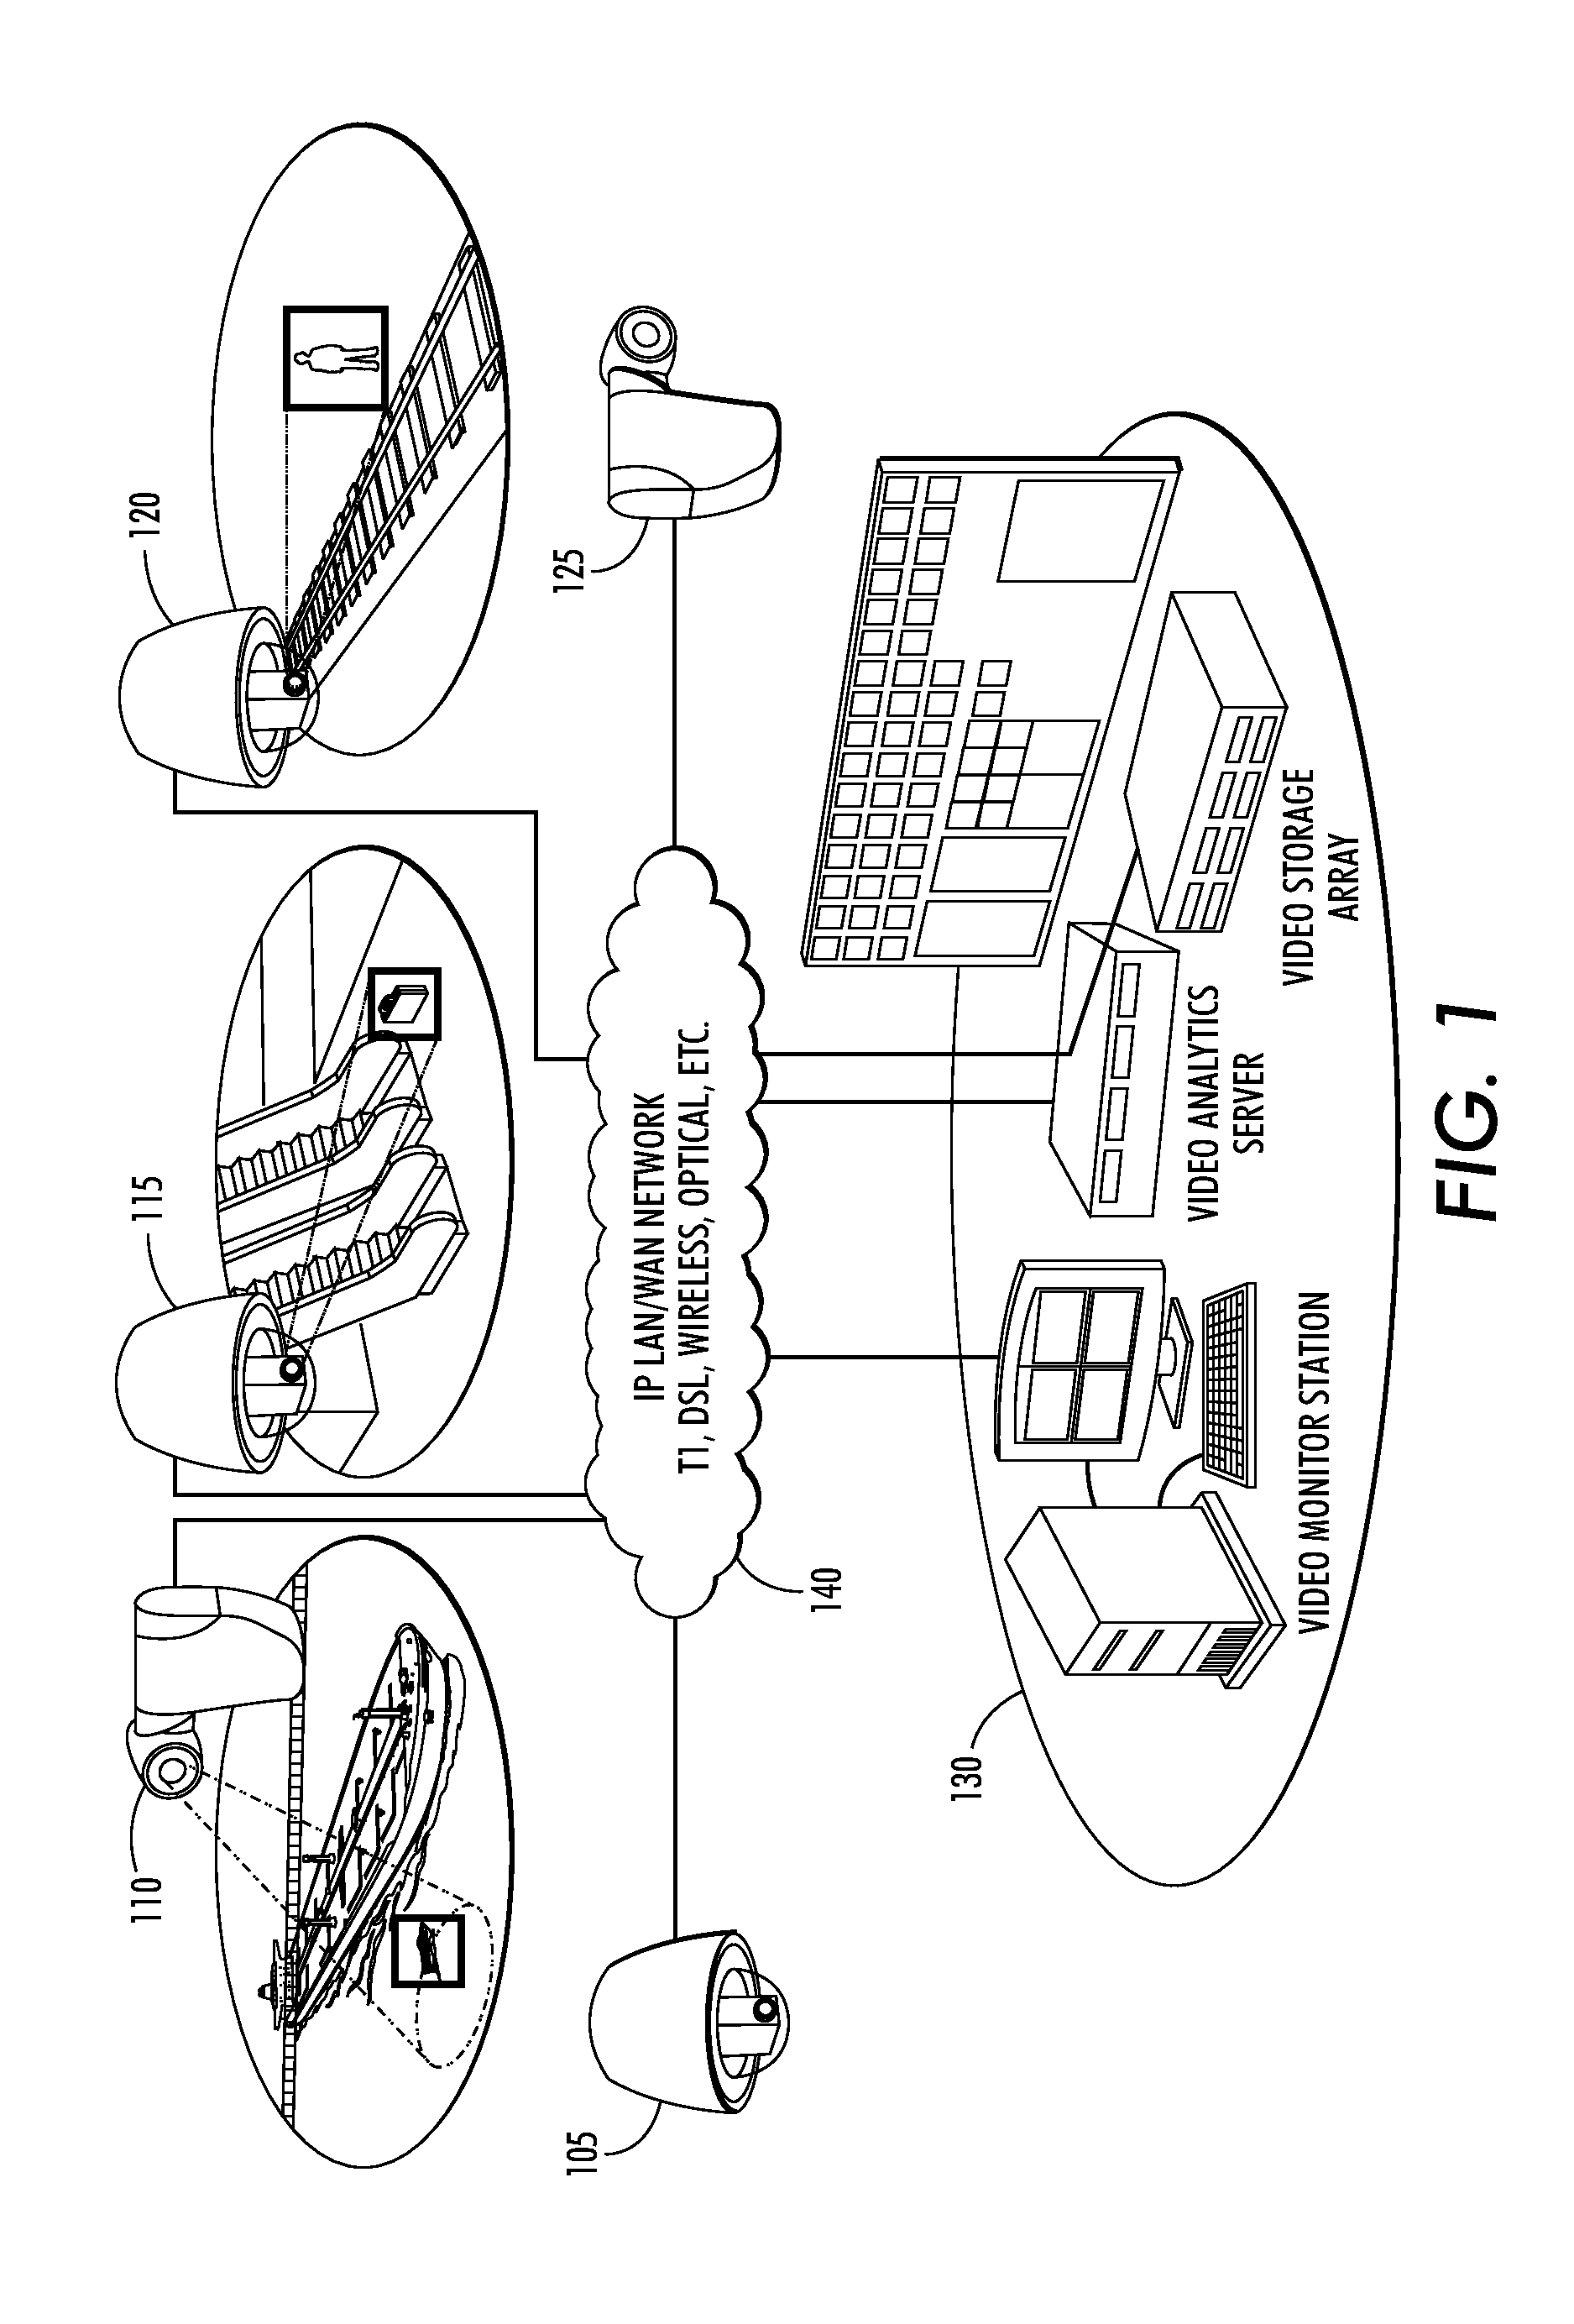 Vehicle counting methods and systems utilizing compressed video streams